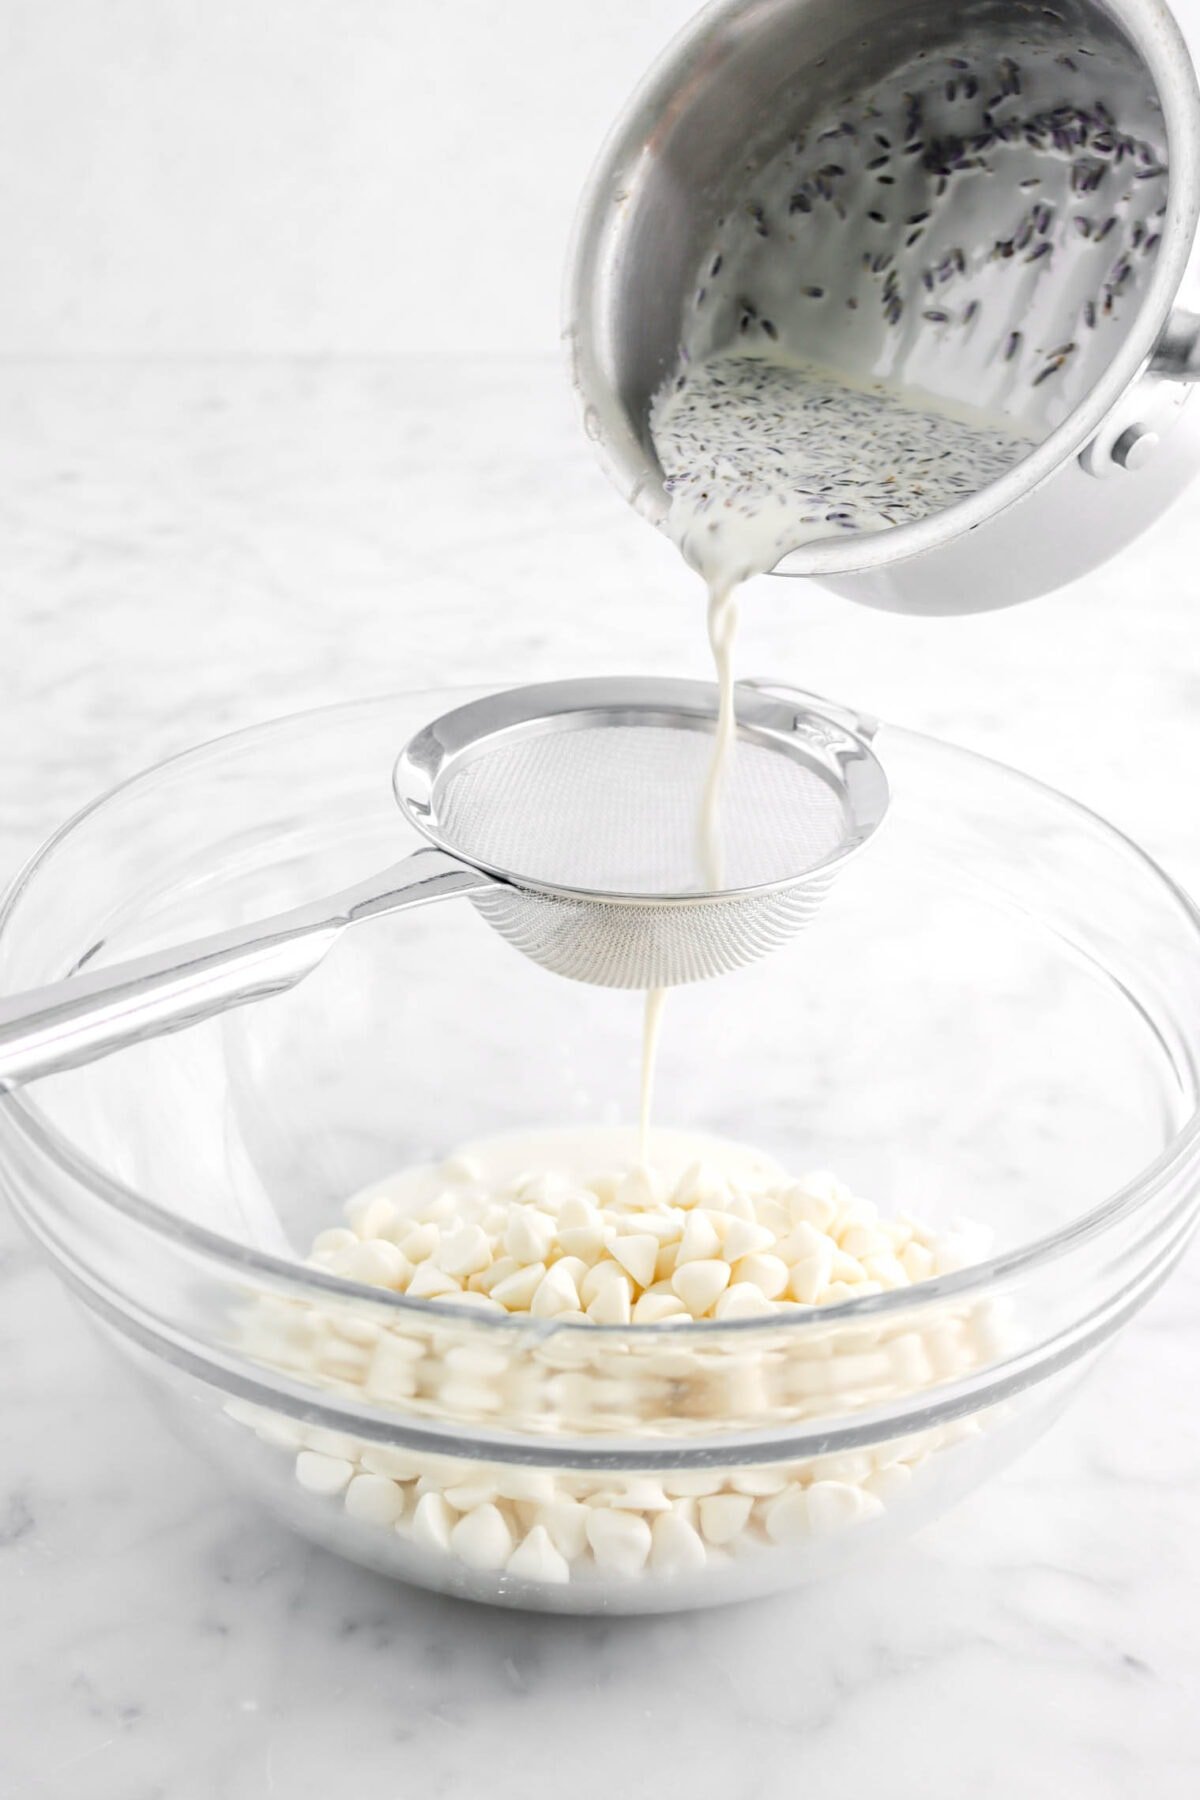 cream and lavender mixture being poured through a sieve into a bowl of white chocolate